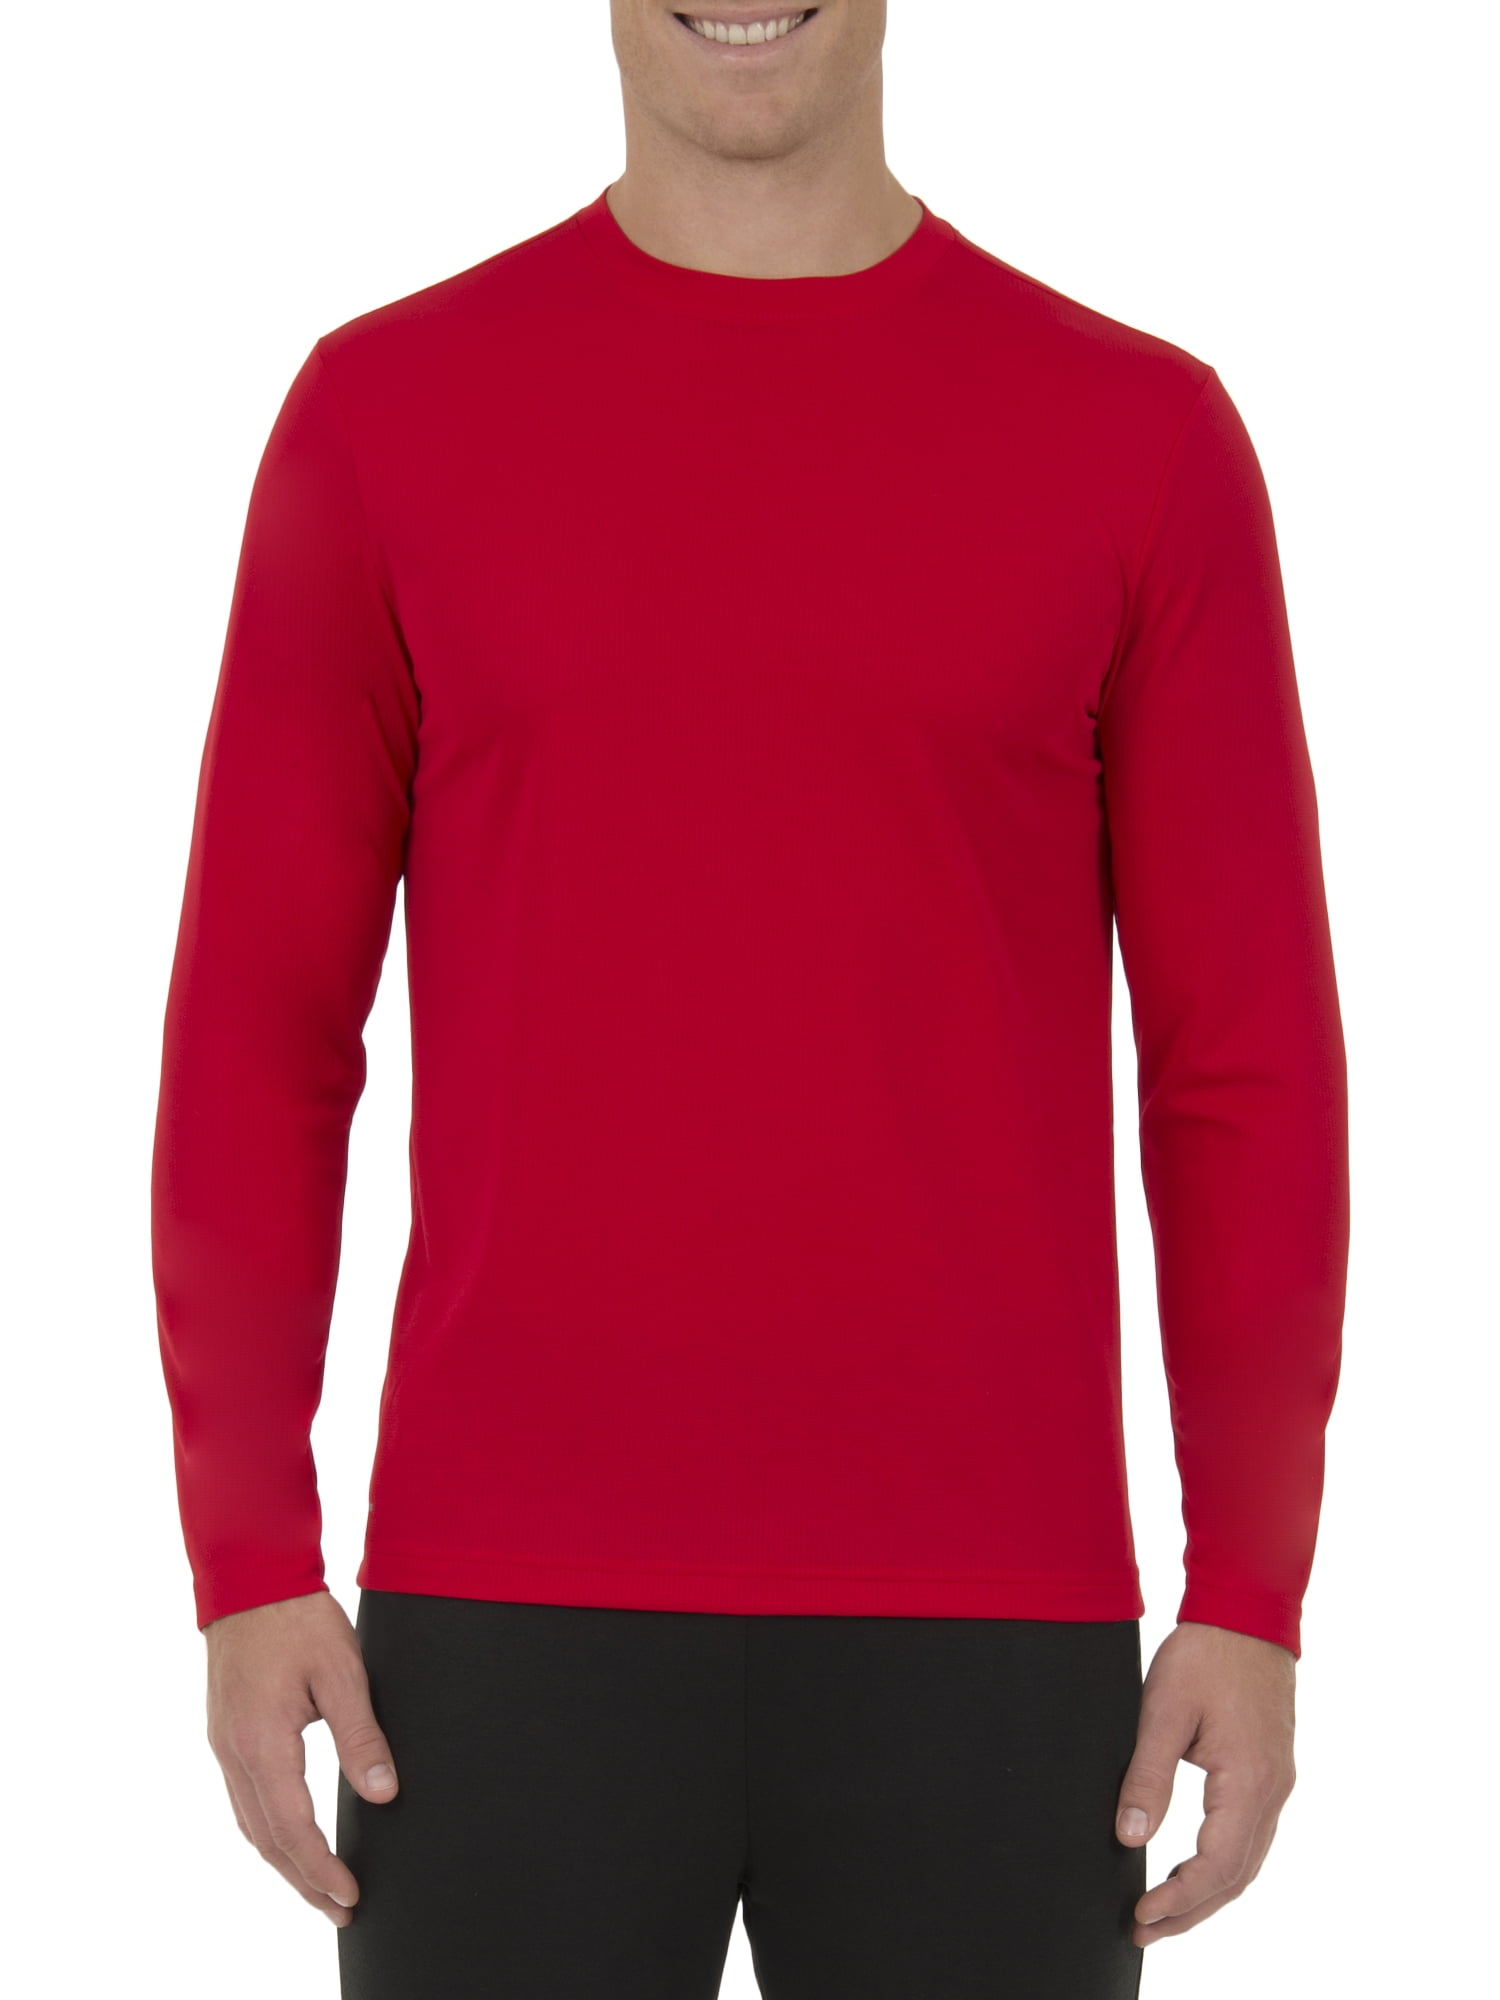 athletic works long sleeve t shirts